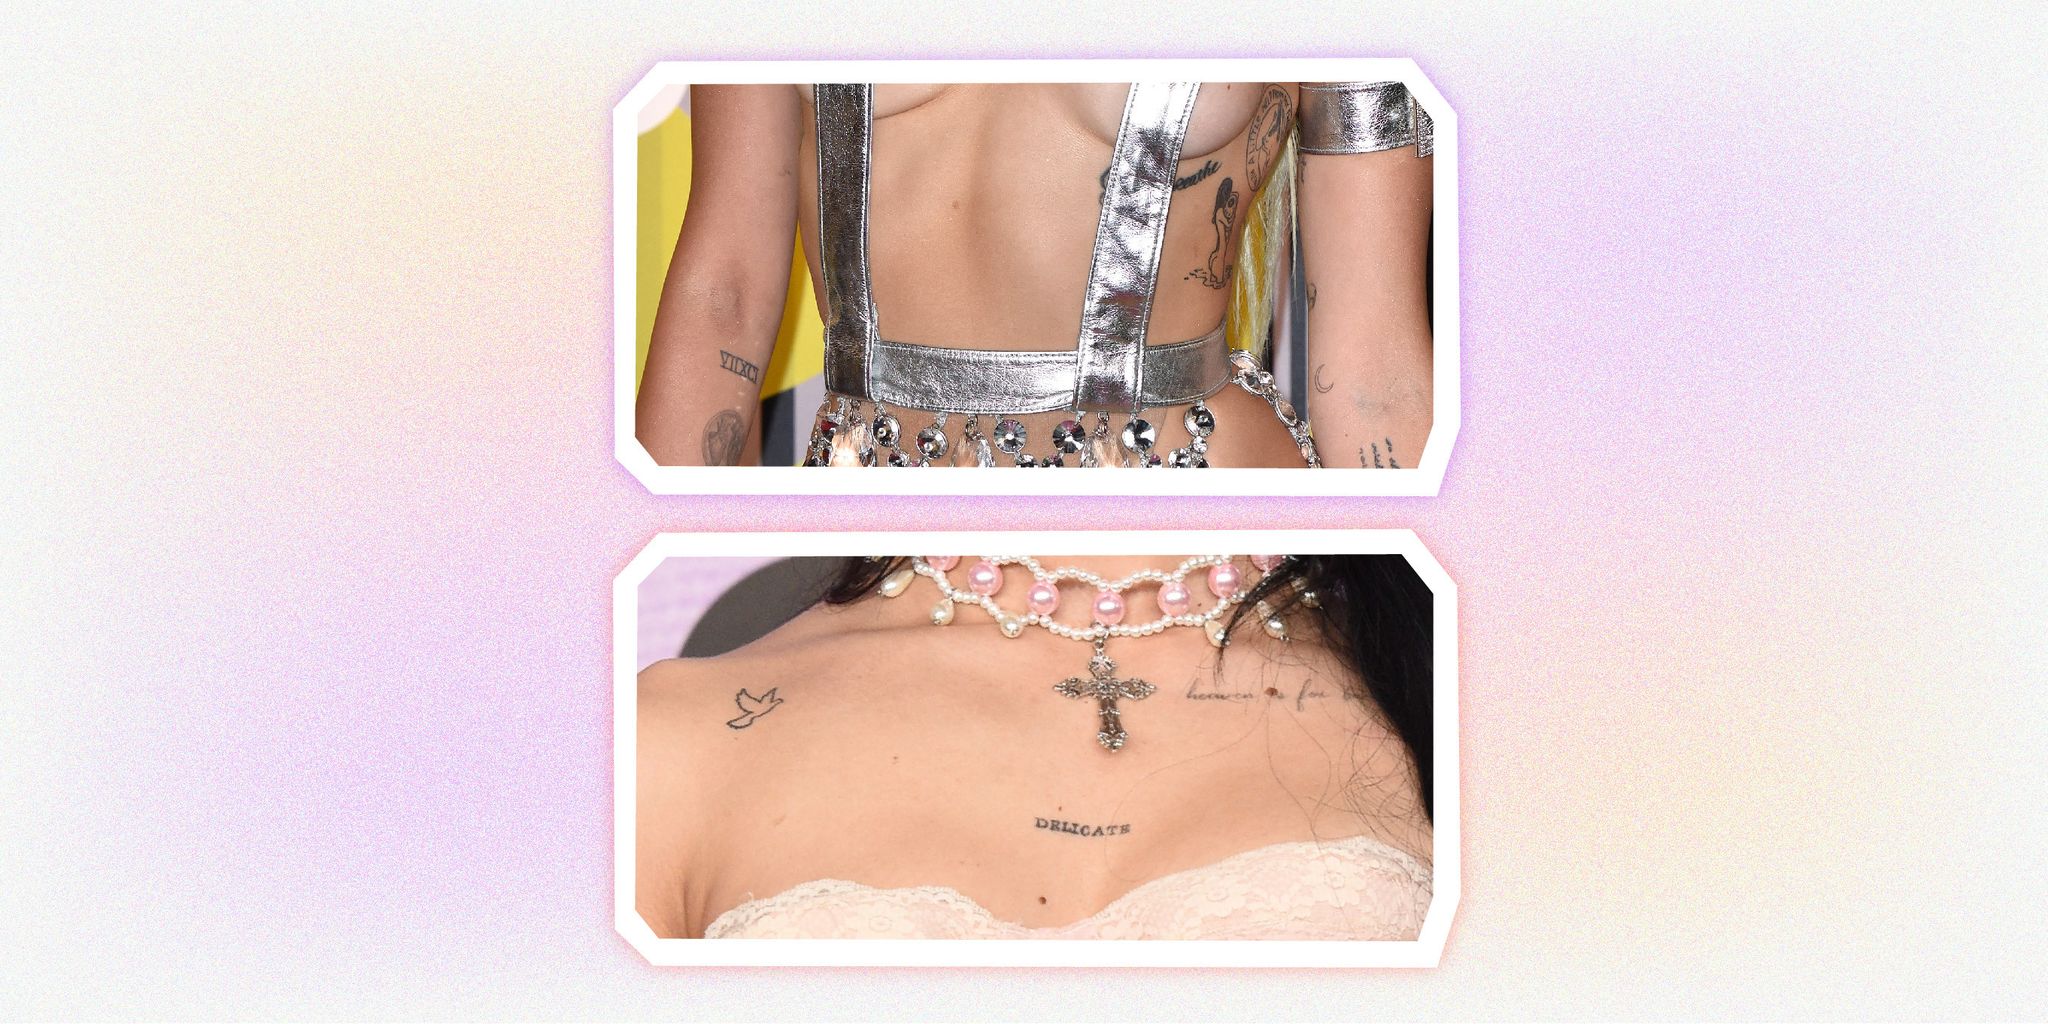 Under the chest tattoo - tattoos under the chest that will make you not  even notice!